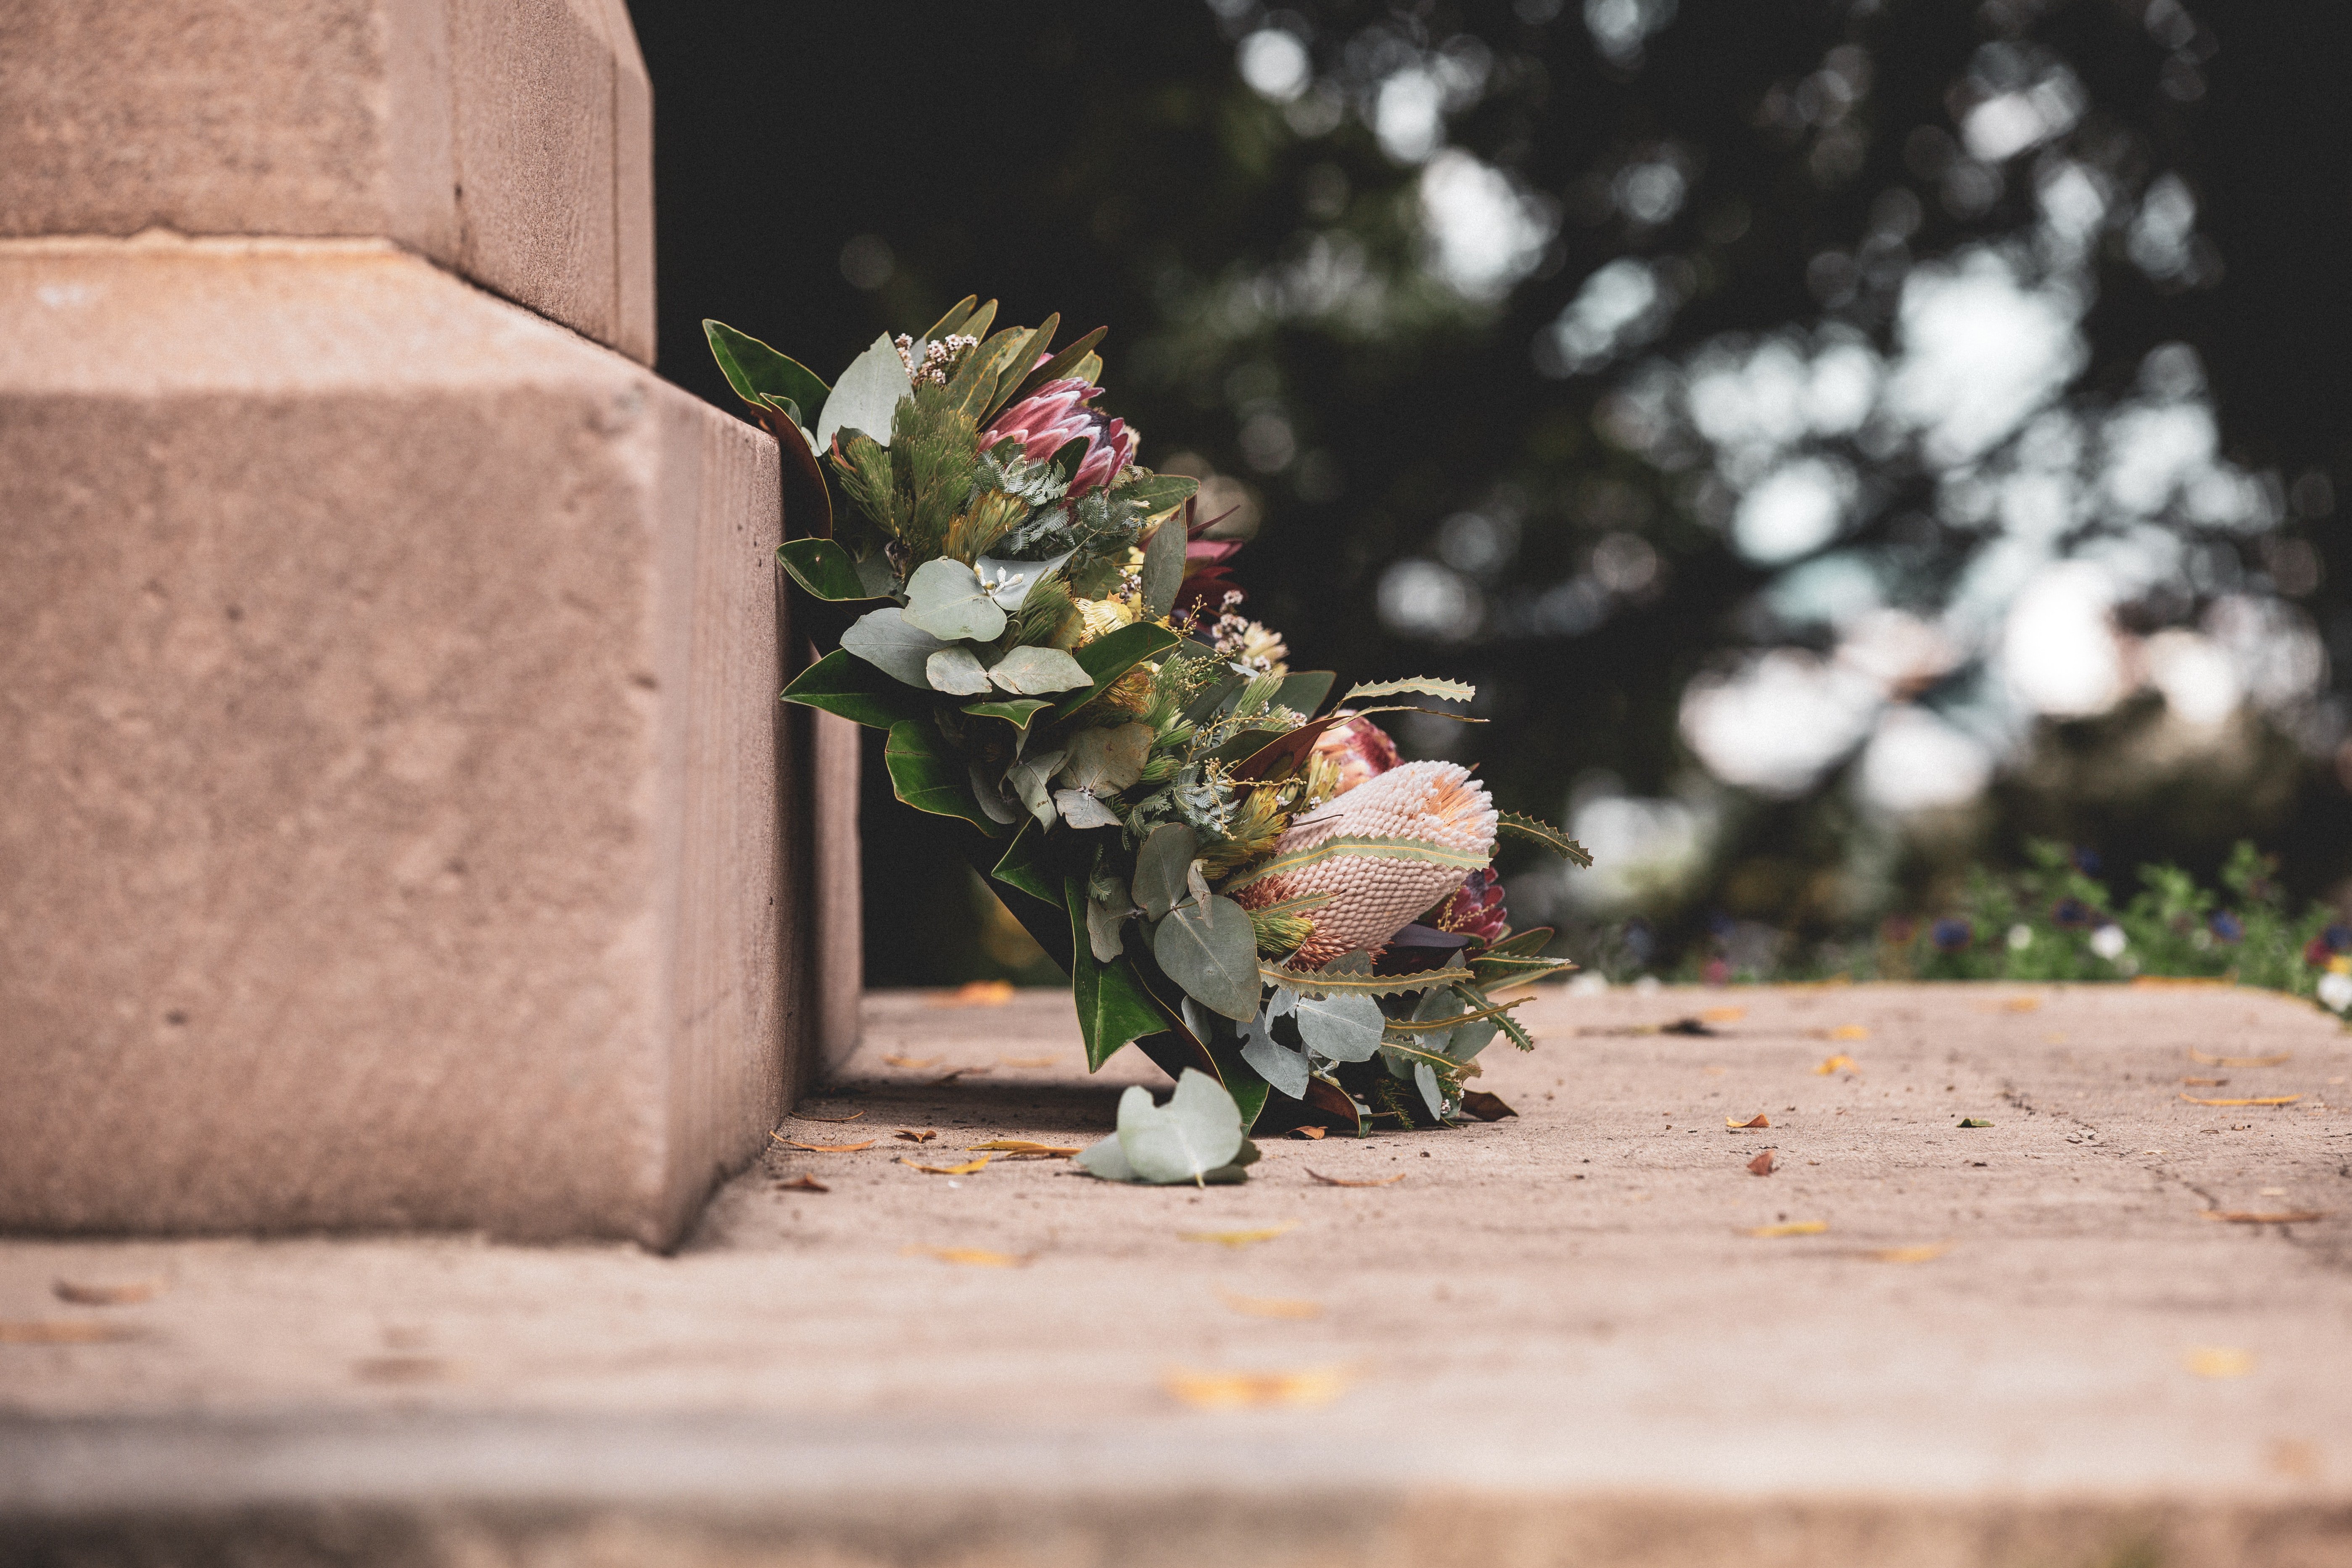 Thelma could not believe that her flowers had not only survived, but they were also in full bloom   | Source: Unsplash